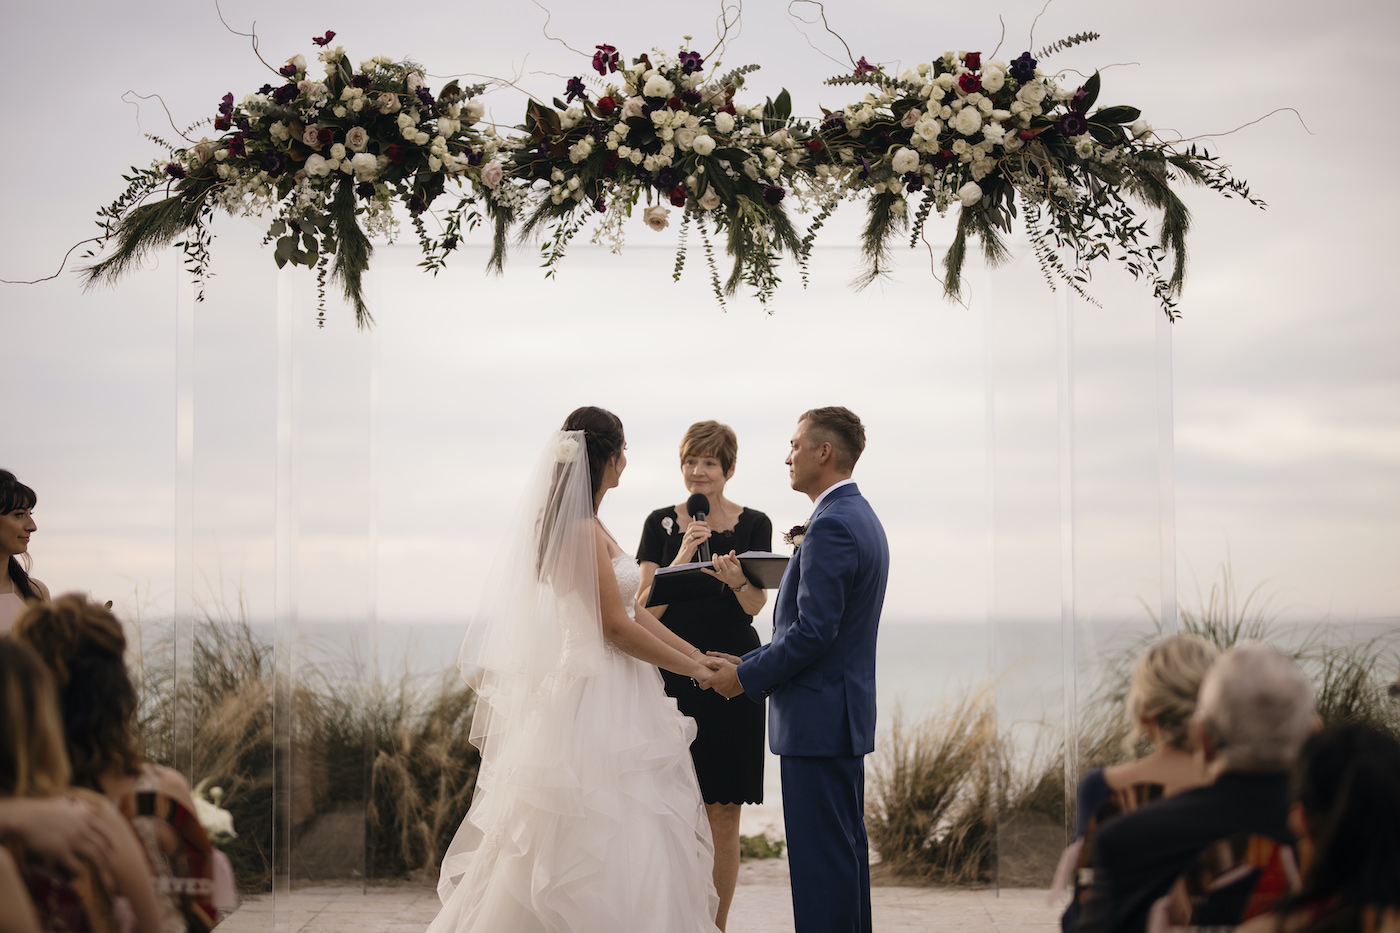 Bride and Groom Exchanging Vows at Sarasota Outdoor Beach Wedding Ceremony on Siesta Key | Acrylic Four Post Arbor Backdrop with White and Deep Red and Blush Pink Floral Arrangement Garland with Eucalyptus Greenery | Tampa Florida Wedding Officiant A Wedding With Grace